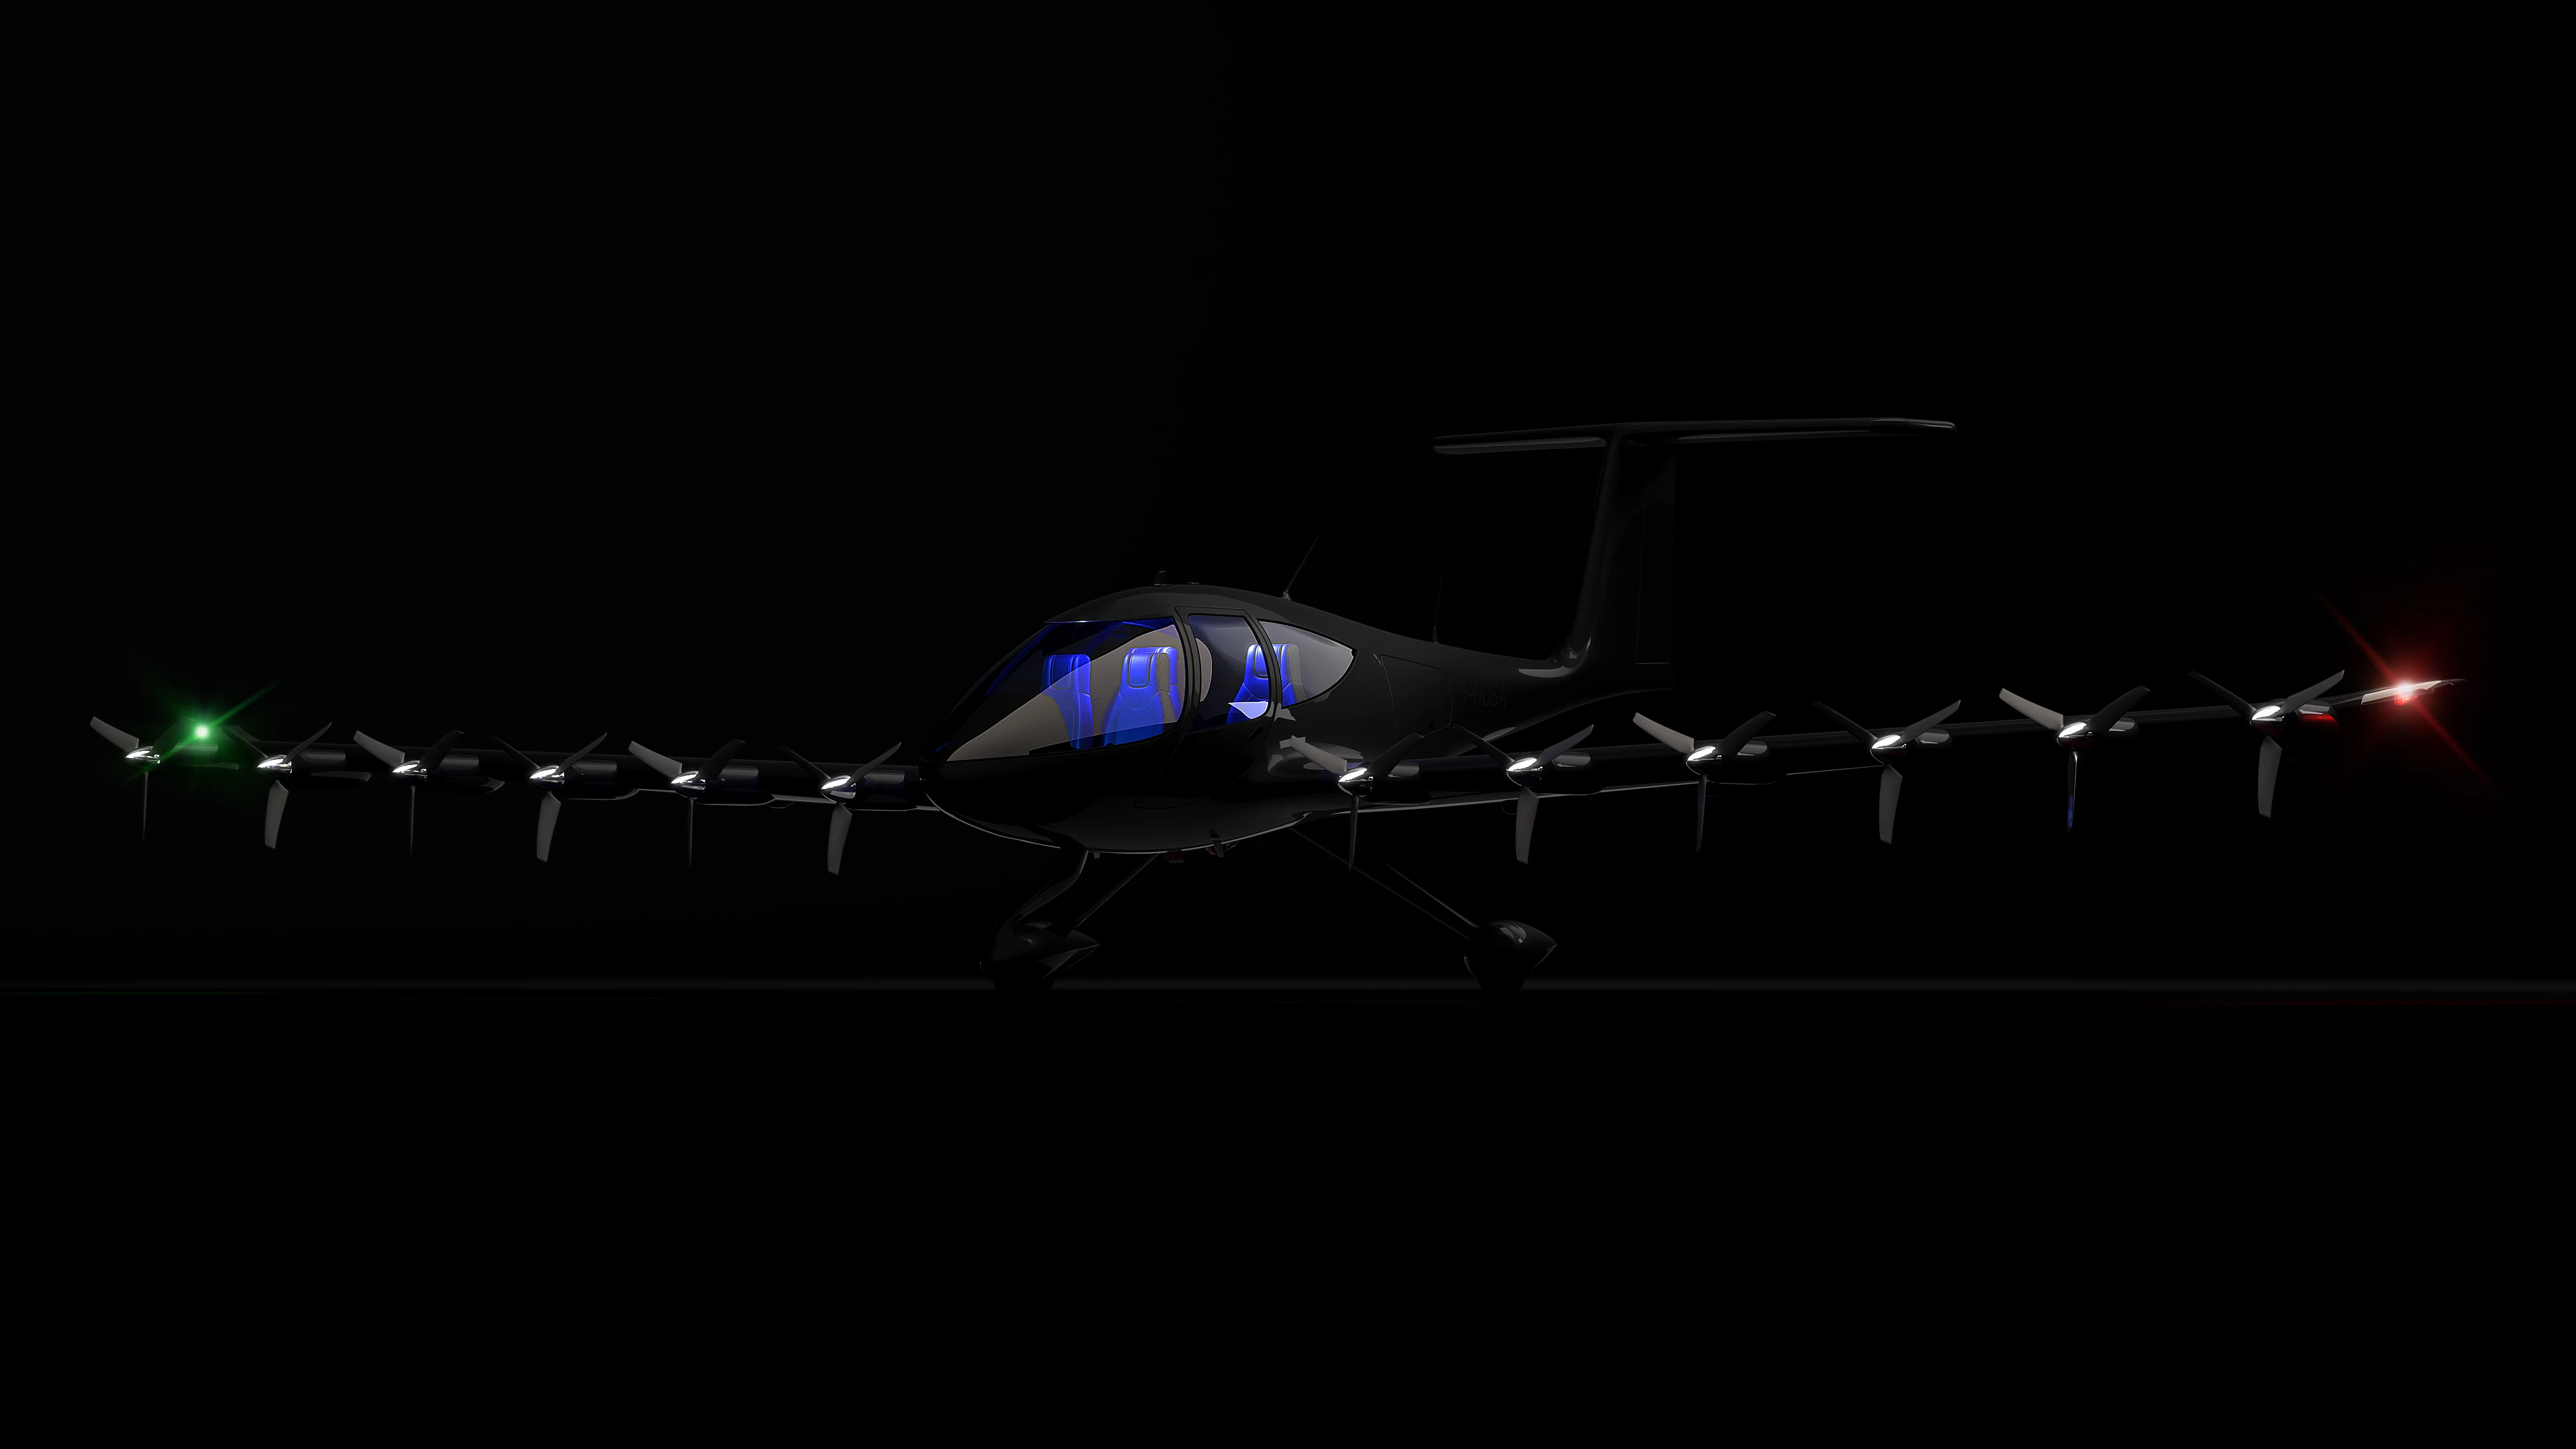 Human flying drone by 7CGI in a black background